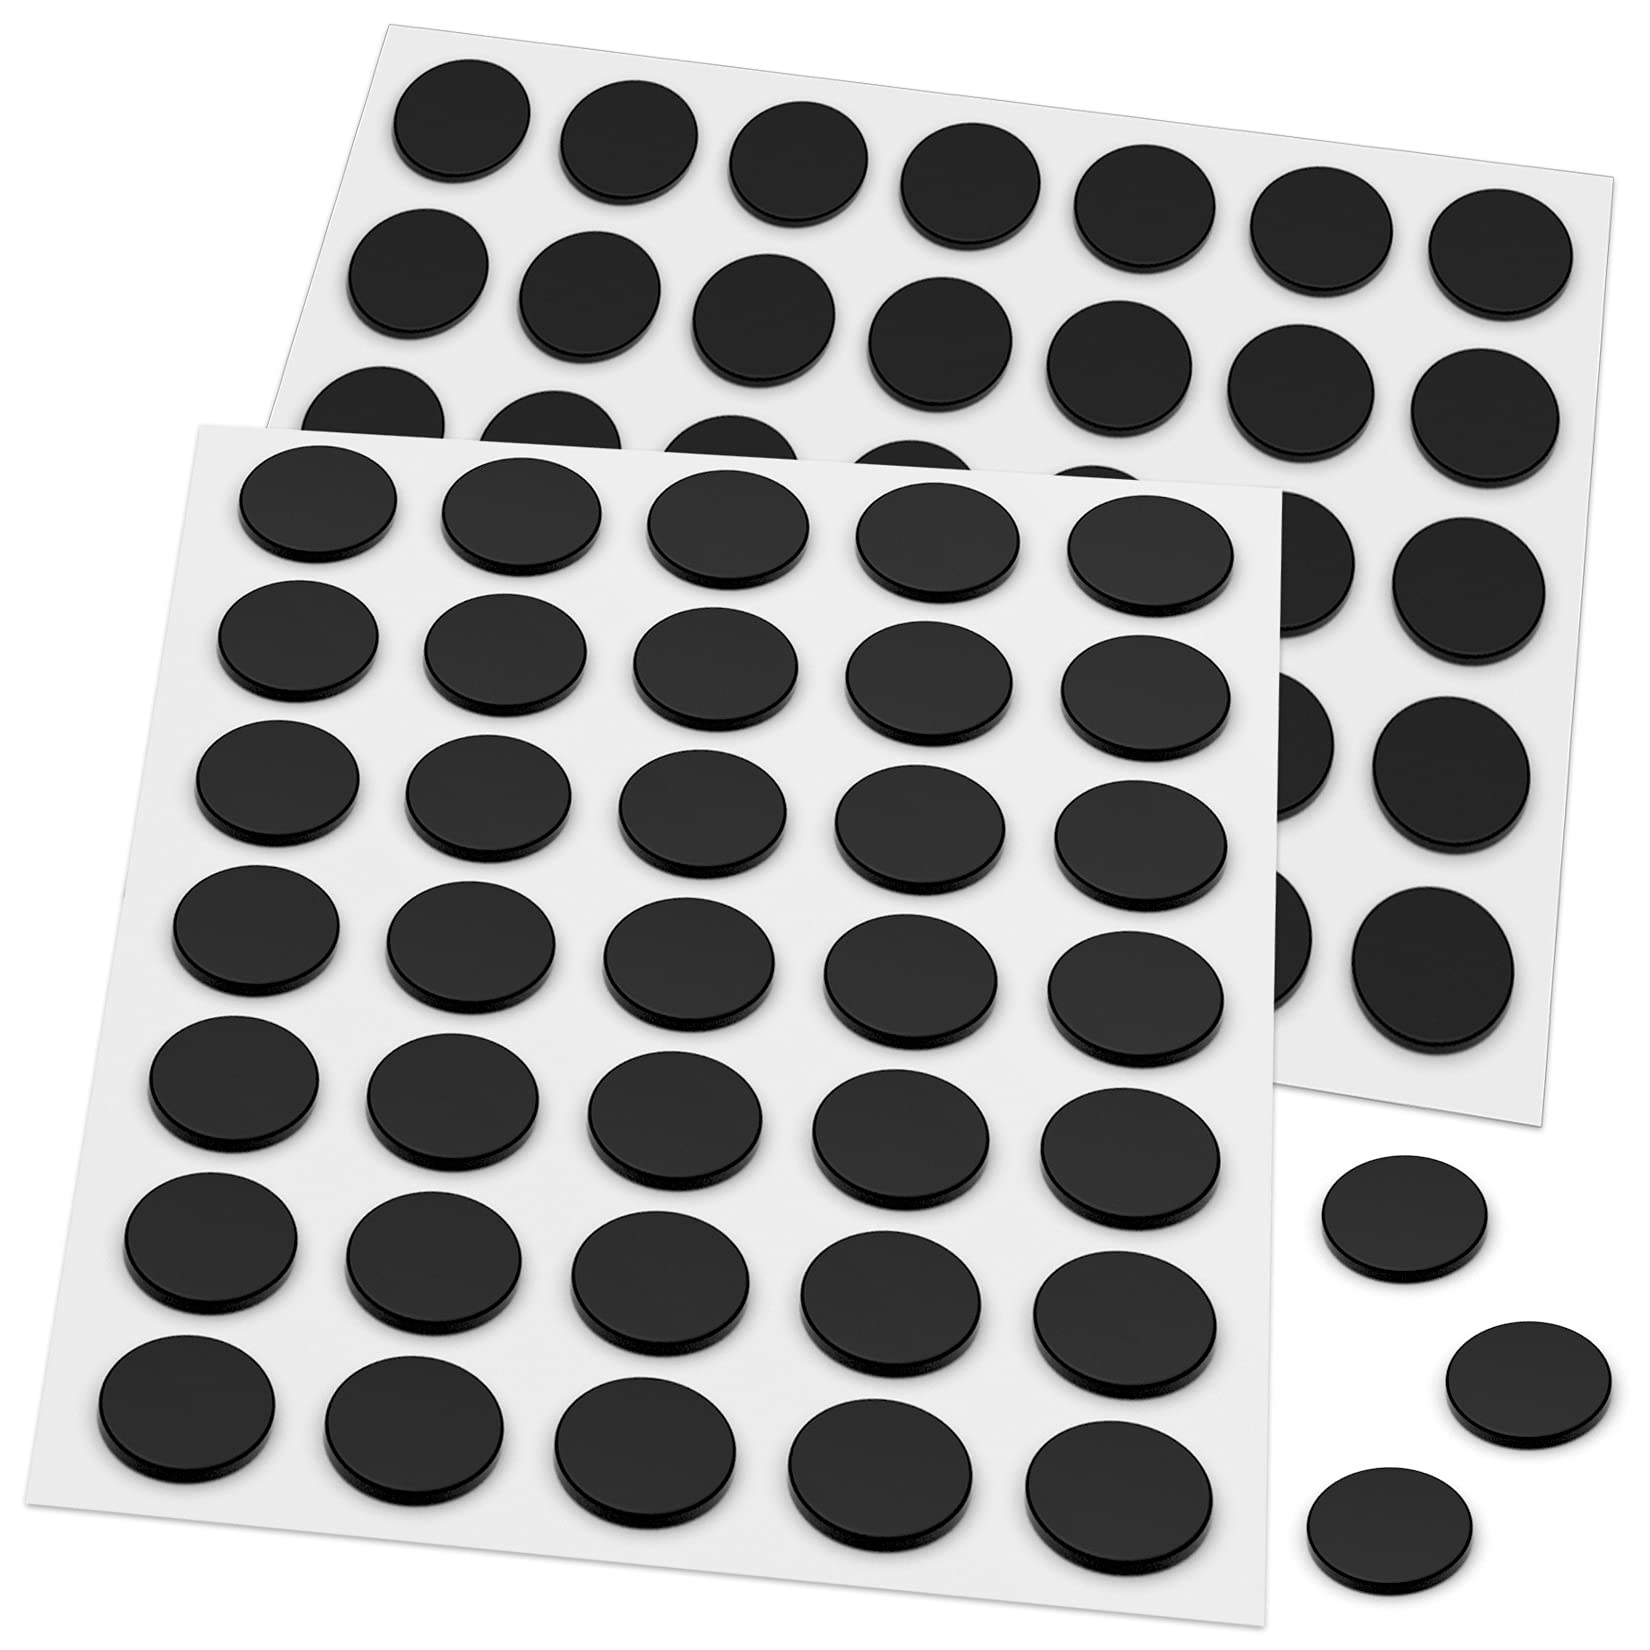 Round Magnets With Adhesive Backing Flexible Magnets Self Adhesive For Crafts Magnetic Tape Small Magnets Magnetic Small Sticky Magnetic Dots For Hanging Organizing Light Objects | Shop Now For